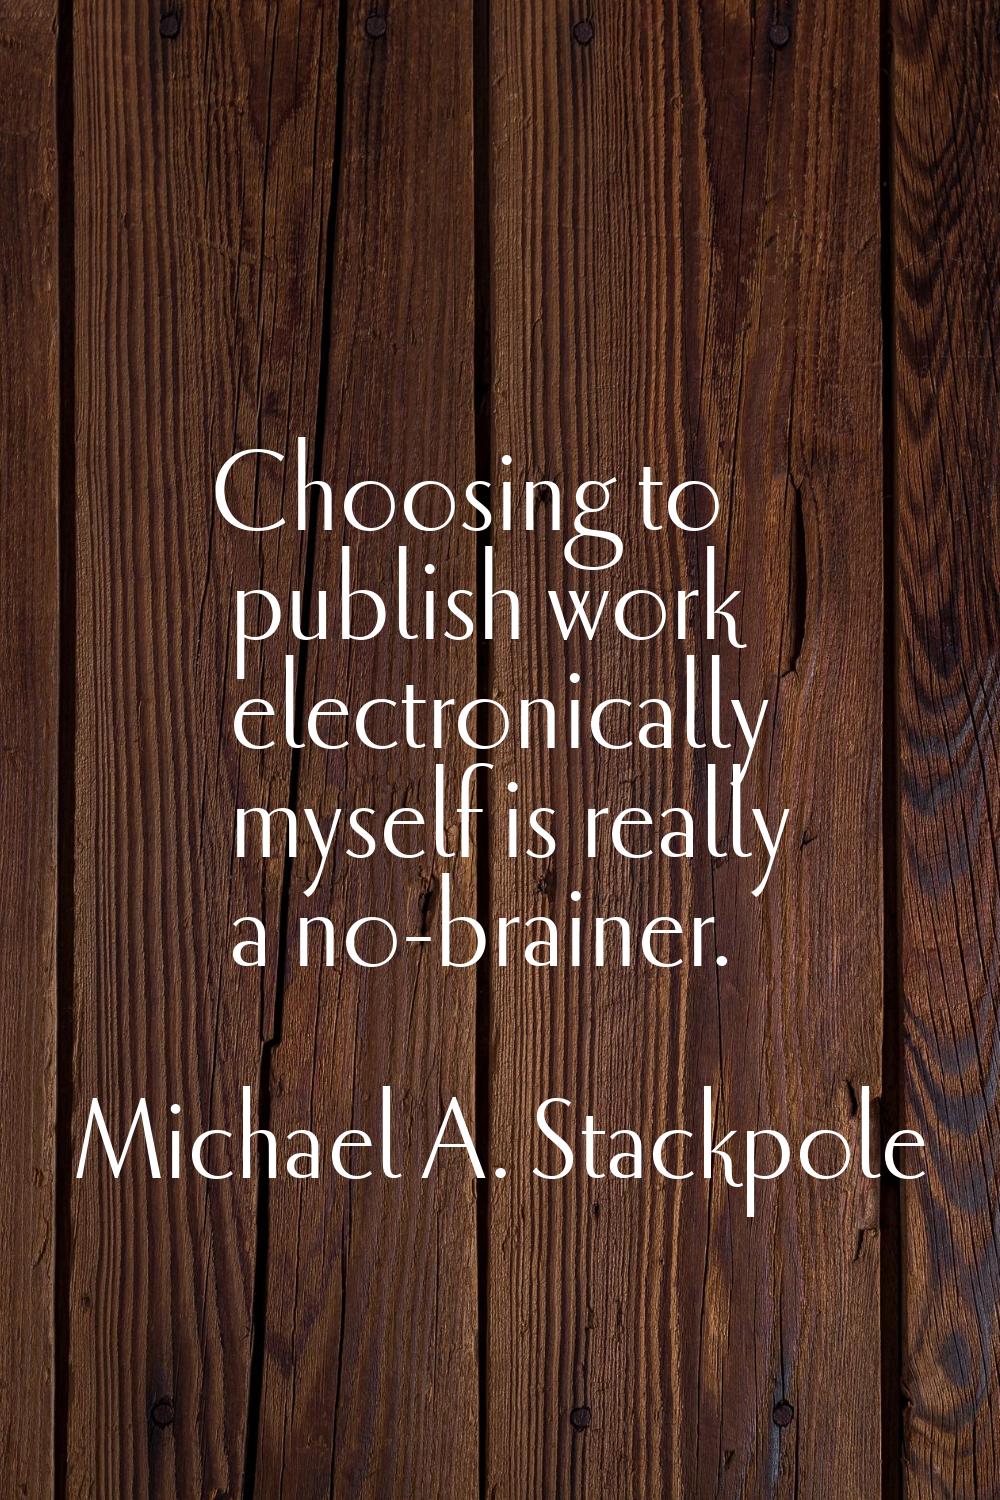 Choosing to publish work electronically myself is really a no-brainer.